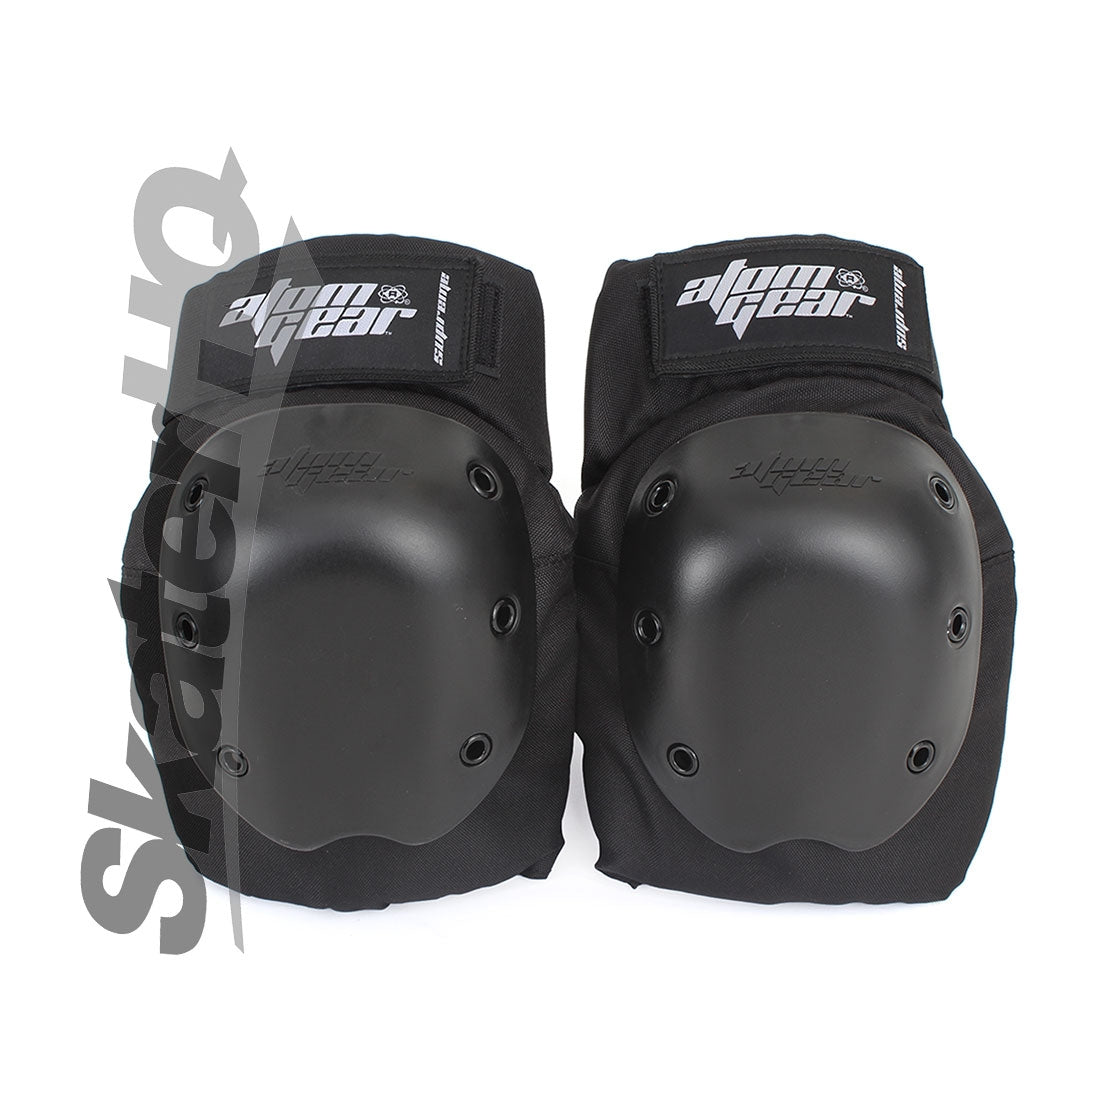 Atom Gear Supreme Knee Guards - Small Protective Gear